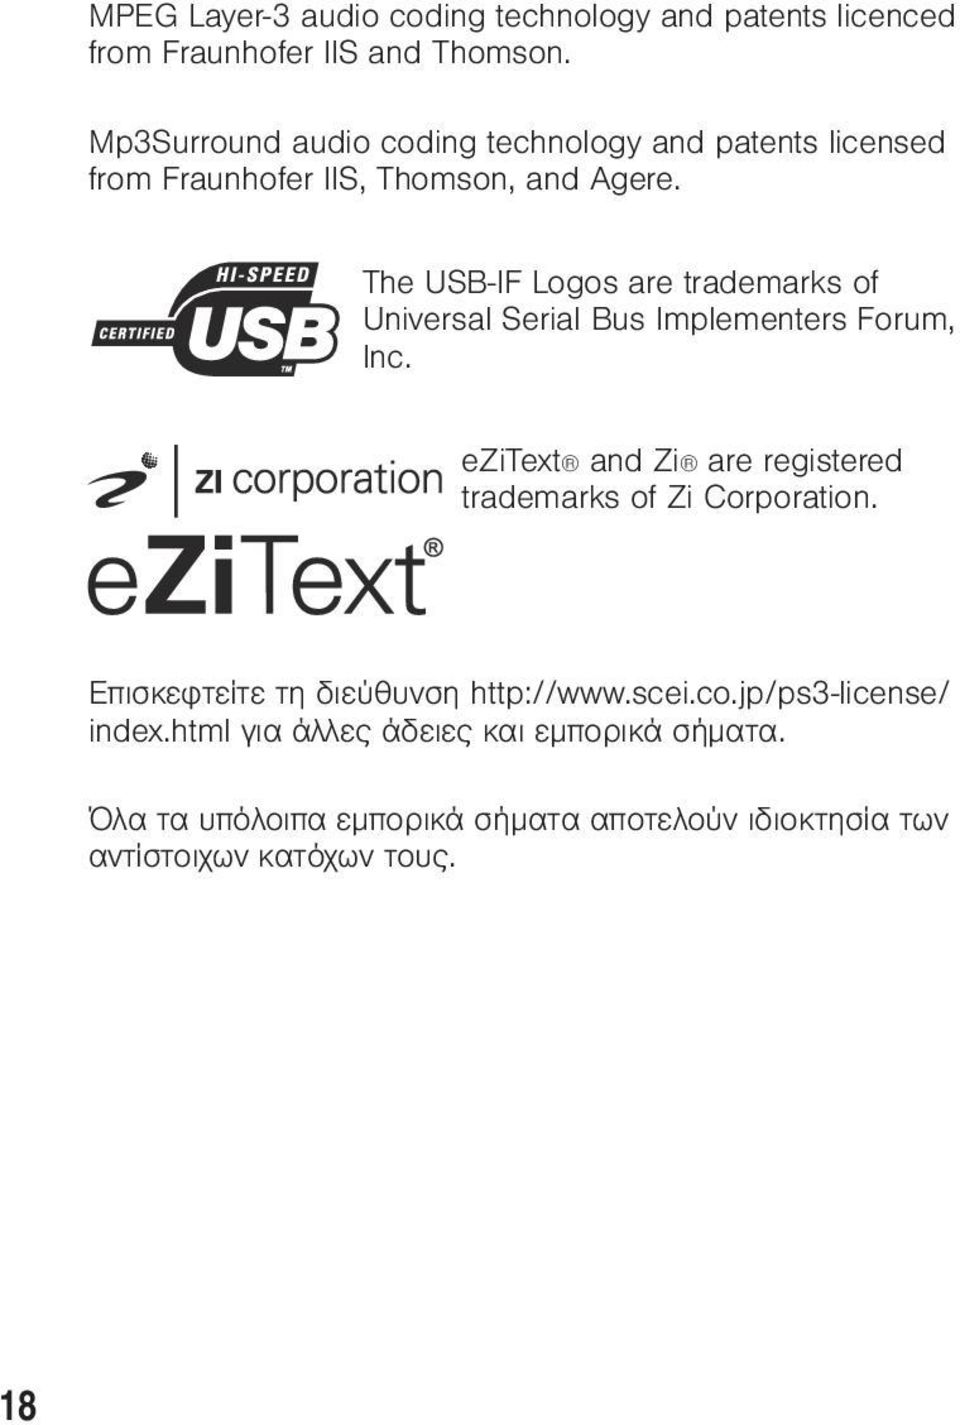 The USB-IF Logos are trademarks of Universal Serial Bus Implementers Forum, Inc.